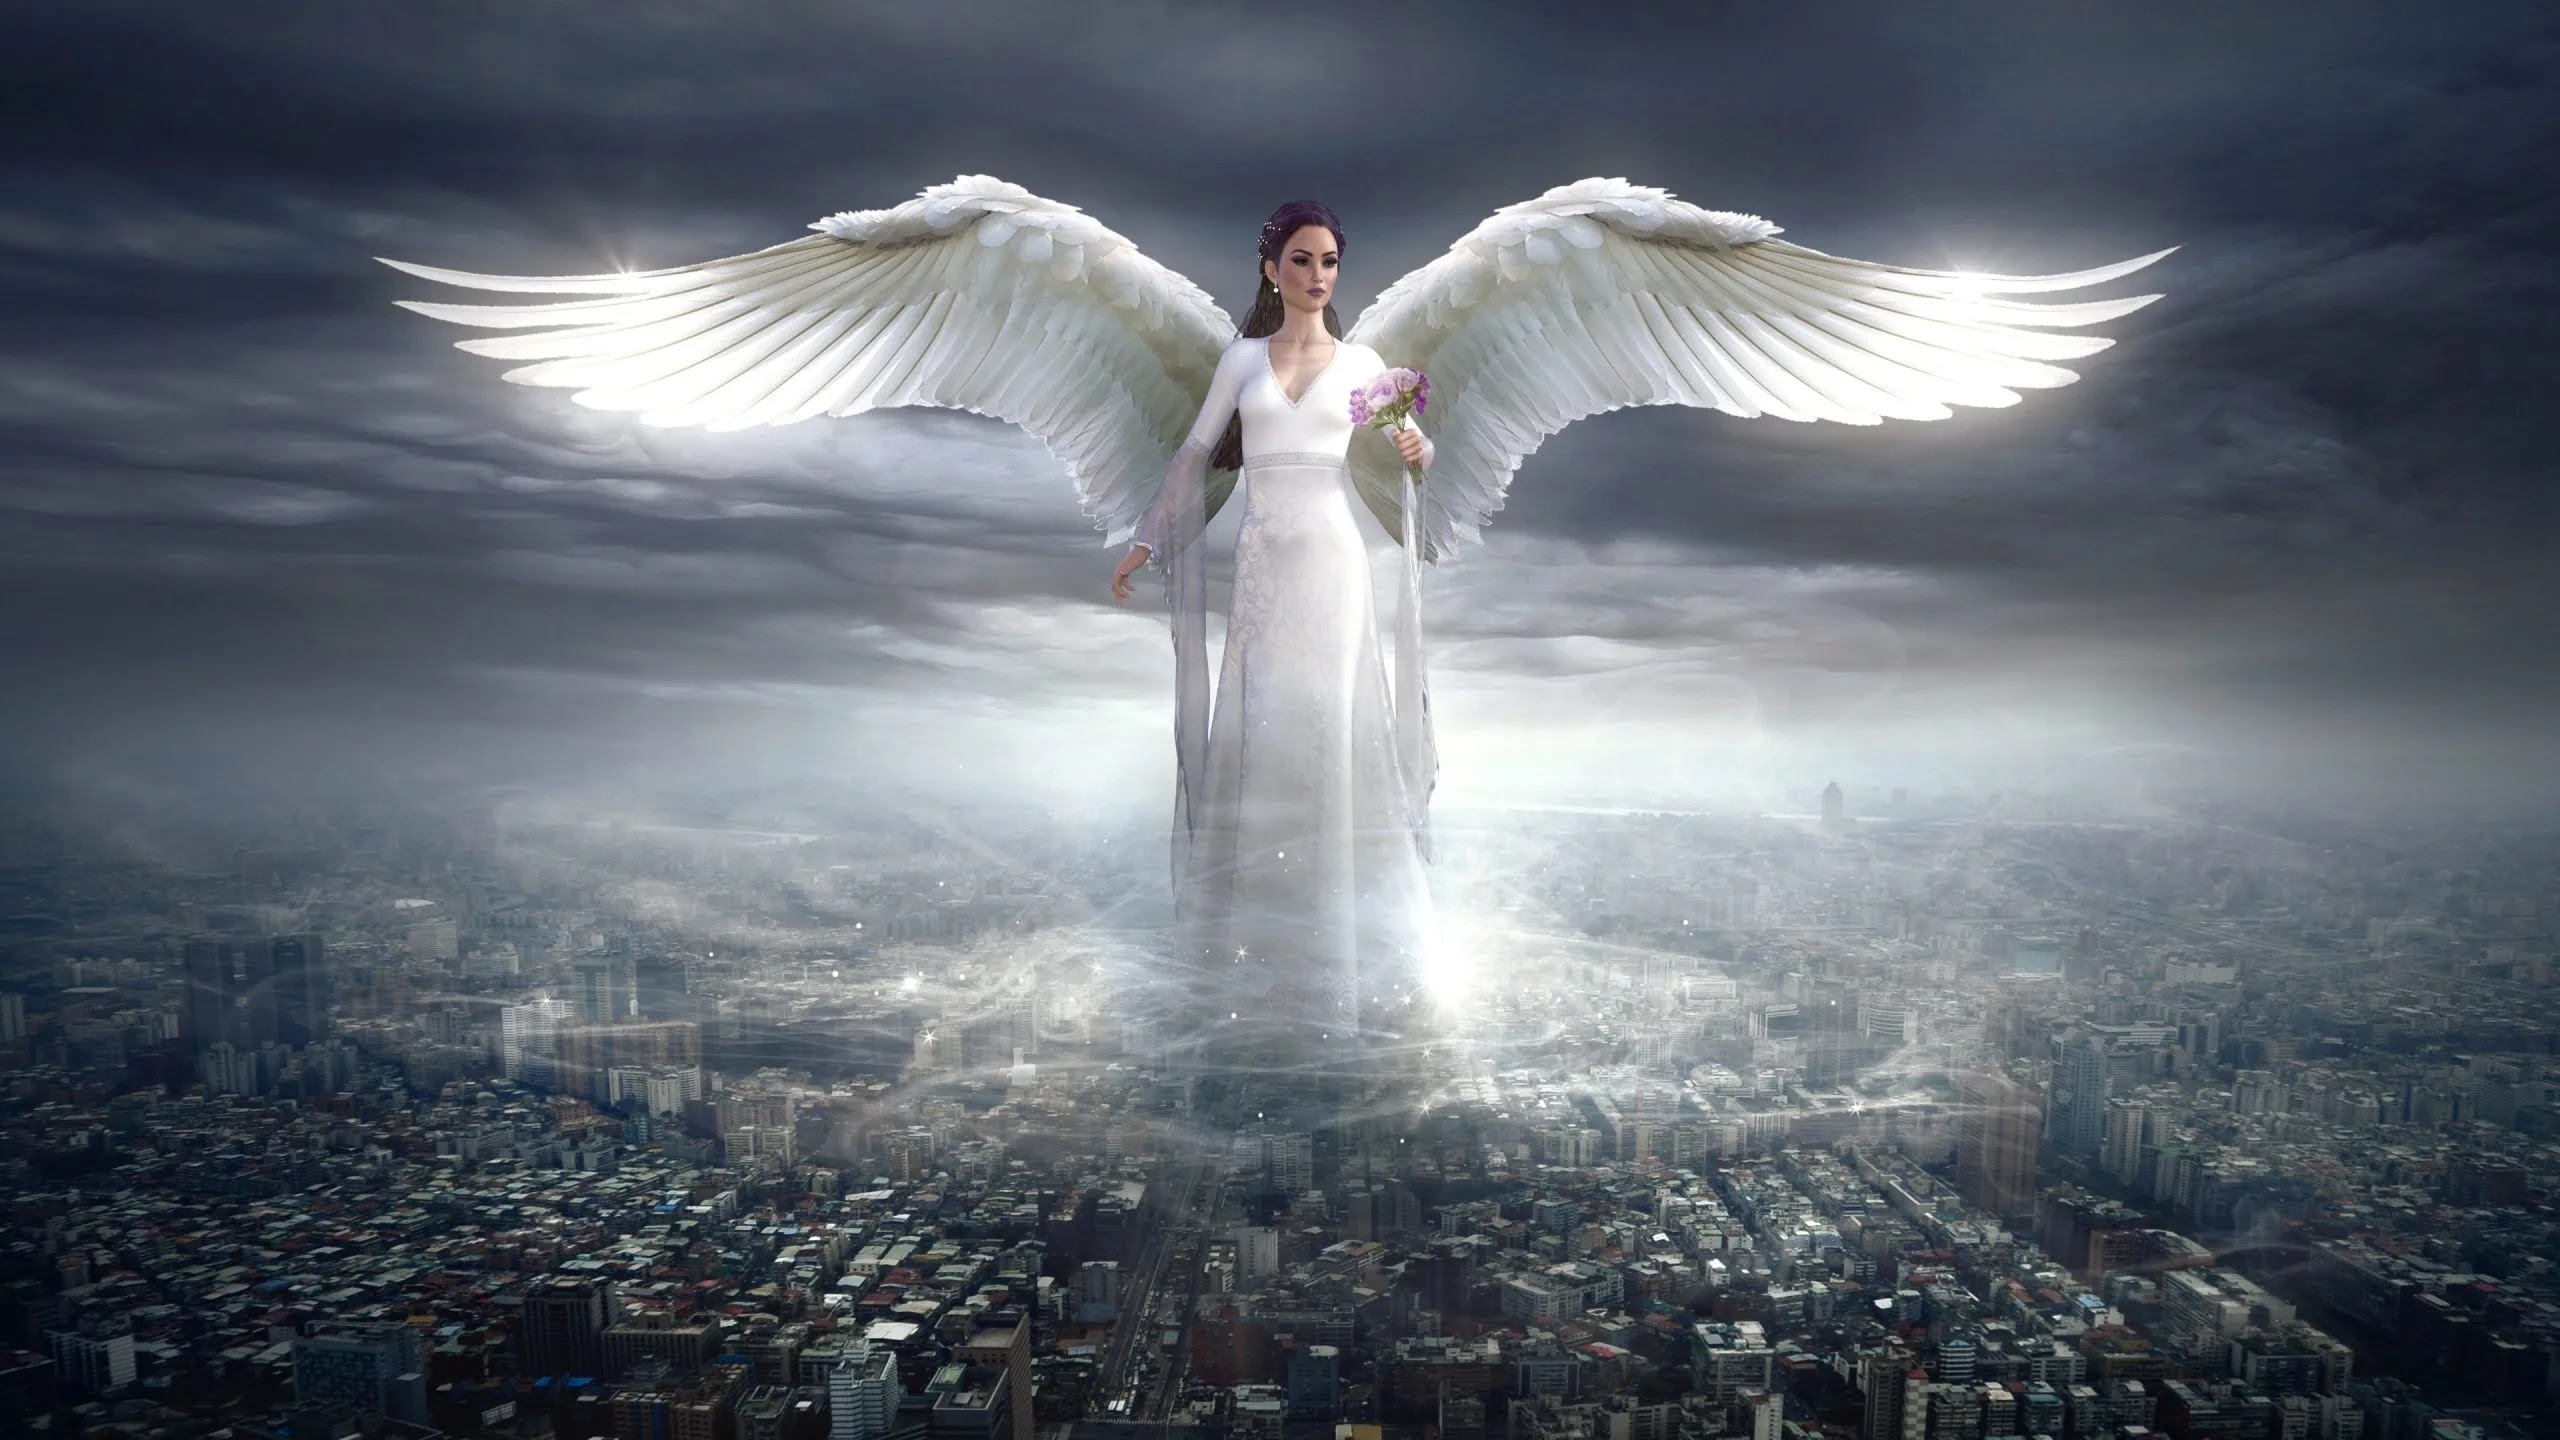 Pastor considers angels to be representatives of a highly developed civilization